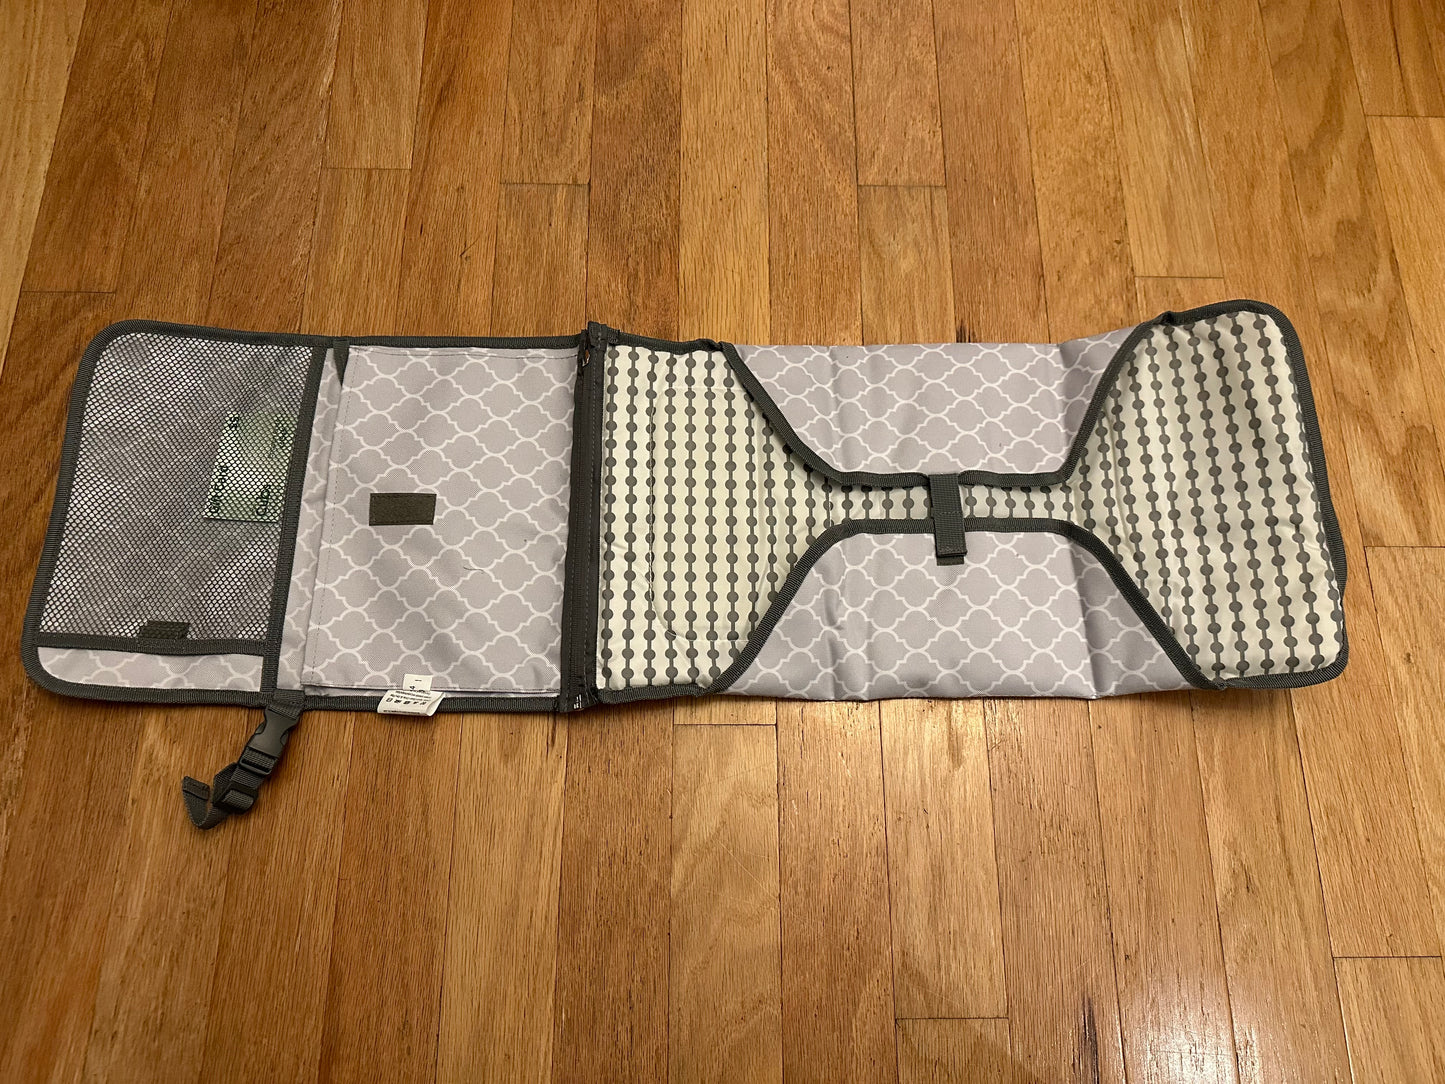 Portable Changing Mat, Never Used